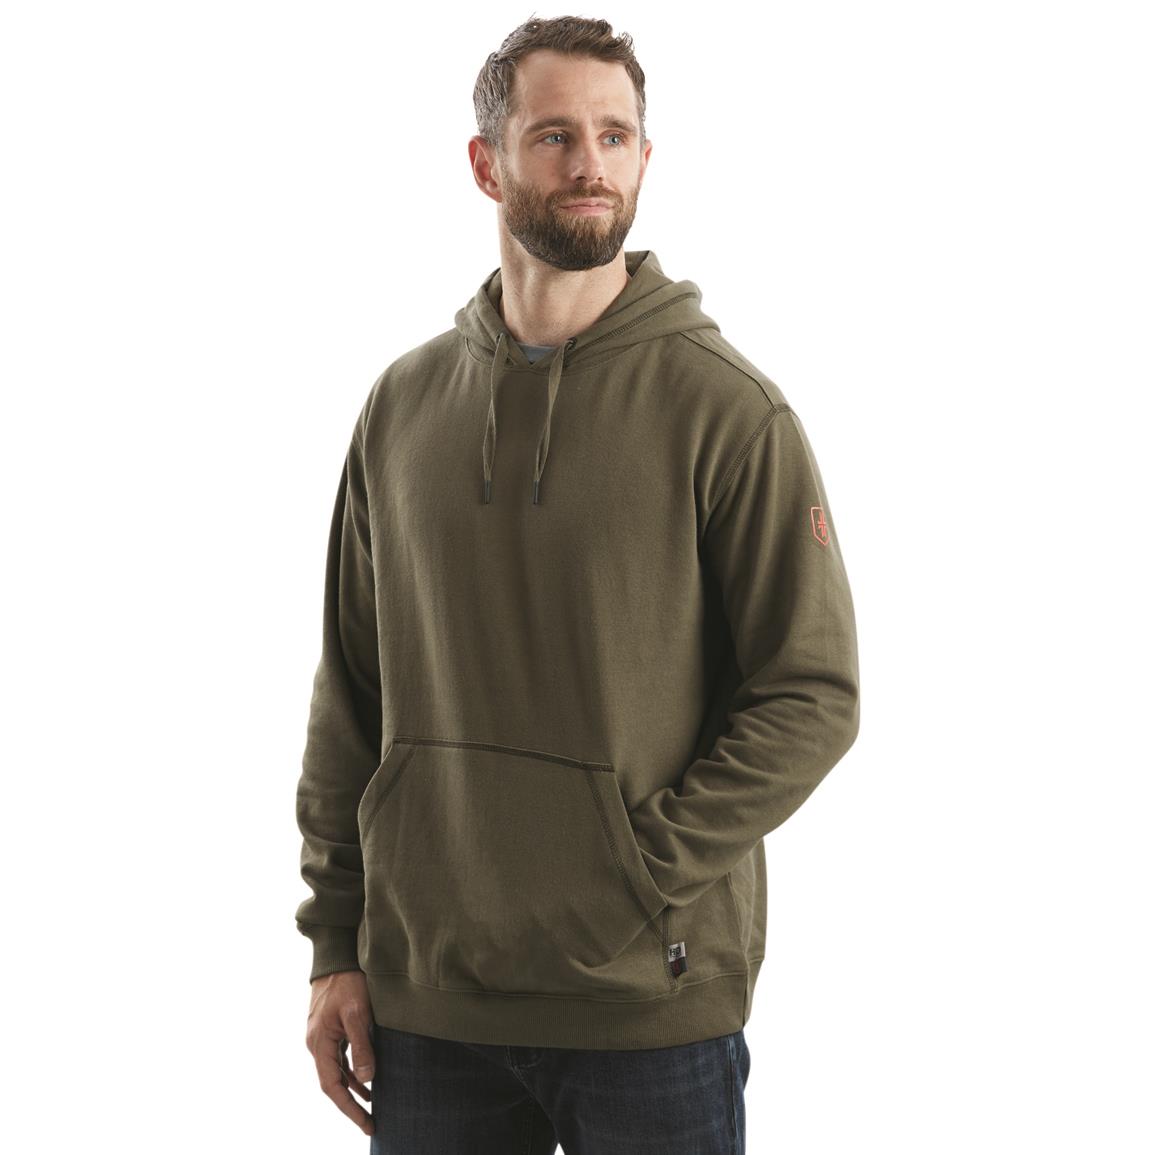 HQ ISSUE + Warrior Poet Society CCW Pullover Hooded Sweatshirt, Grapeleaf